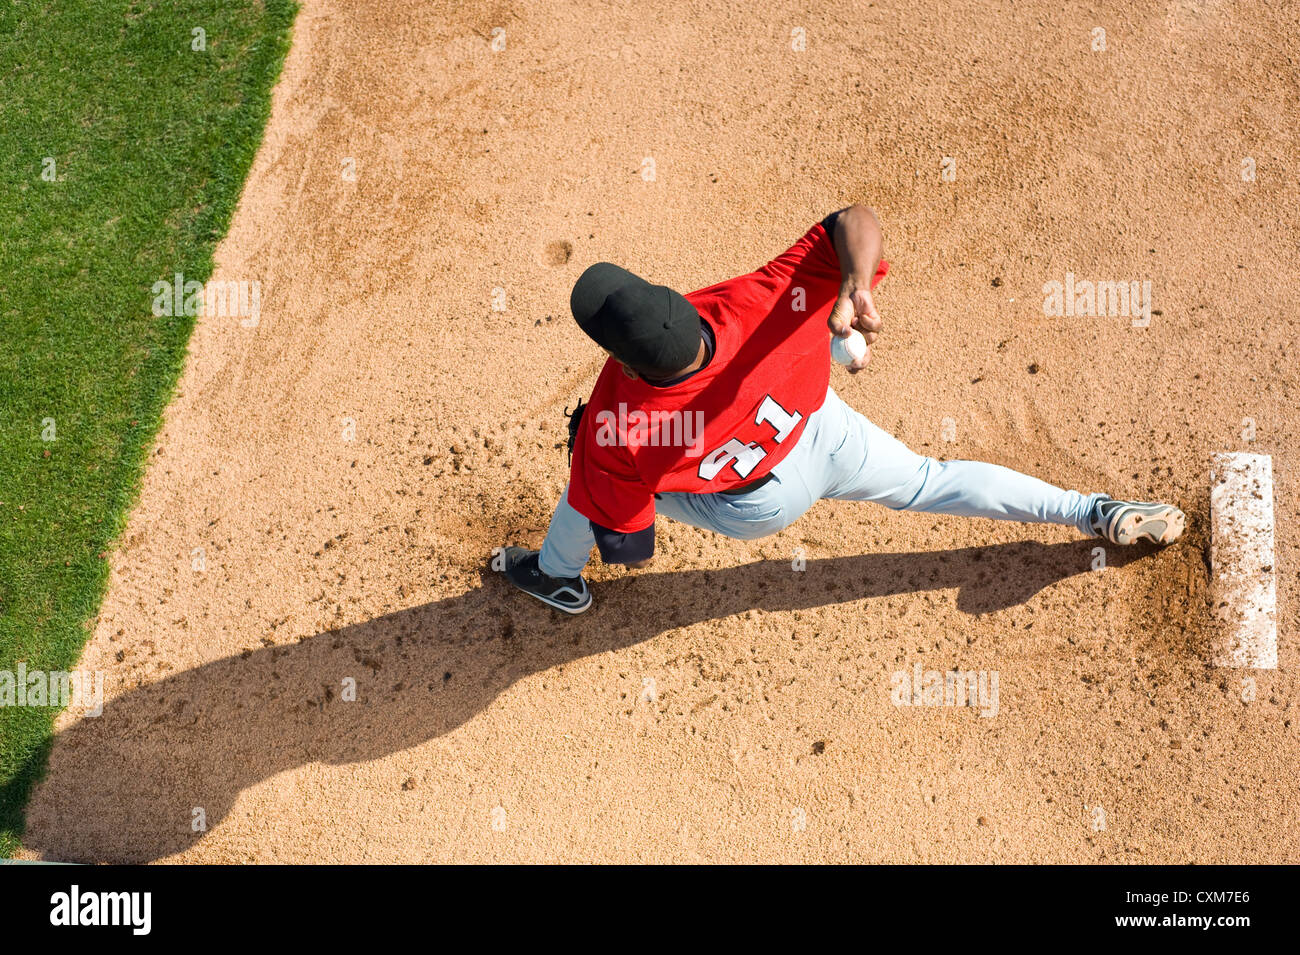 a baseball pitcher throwing a pitch with copy space Stock Photo